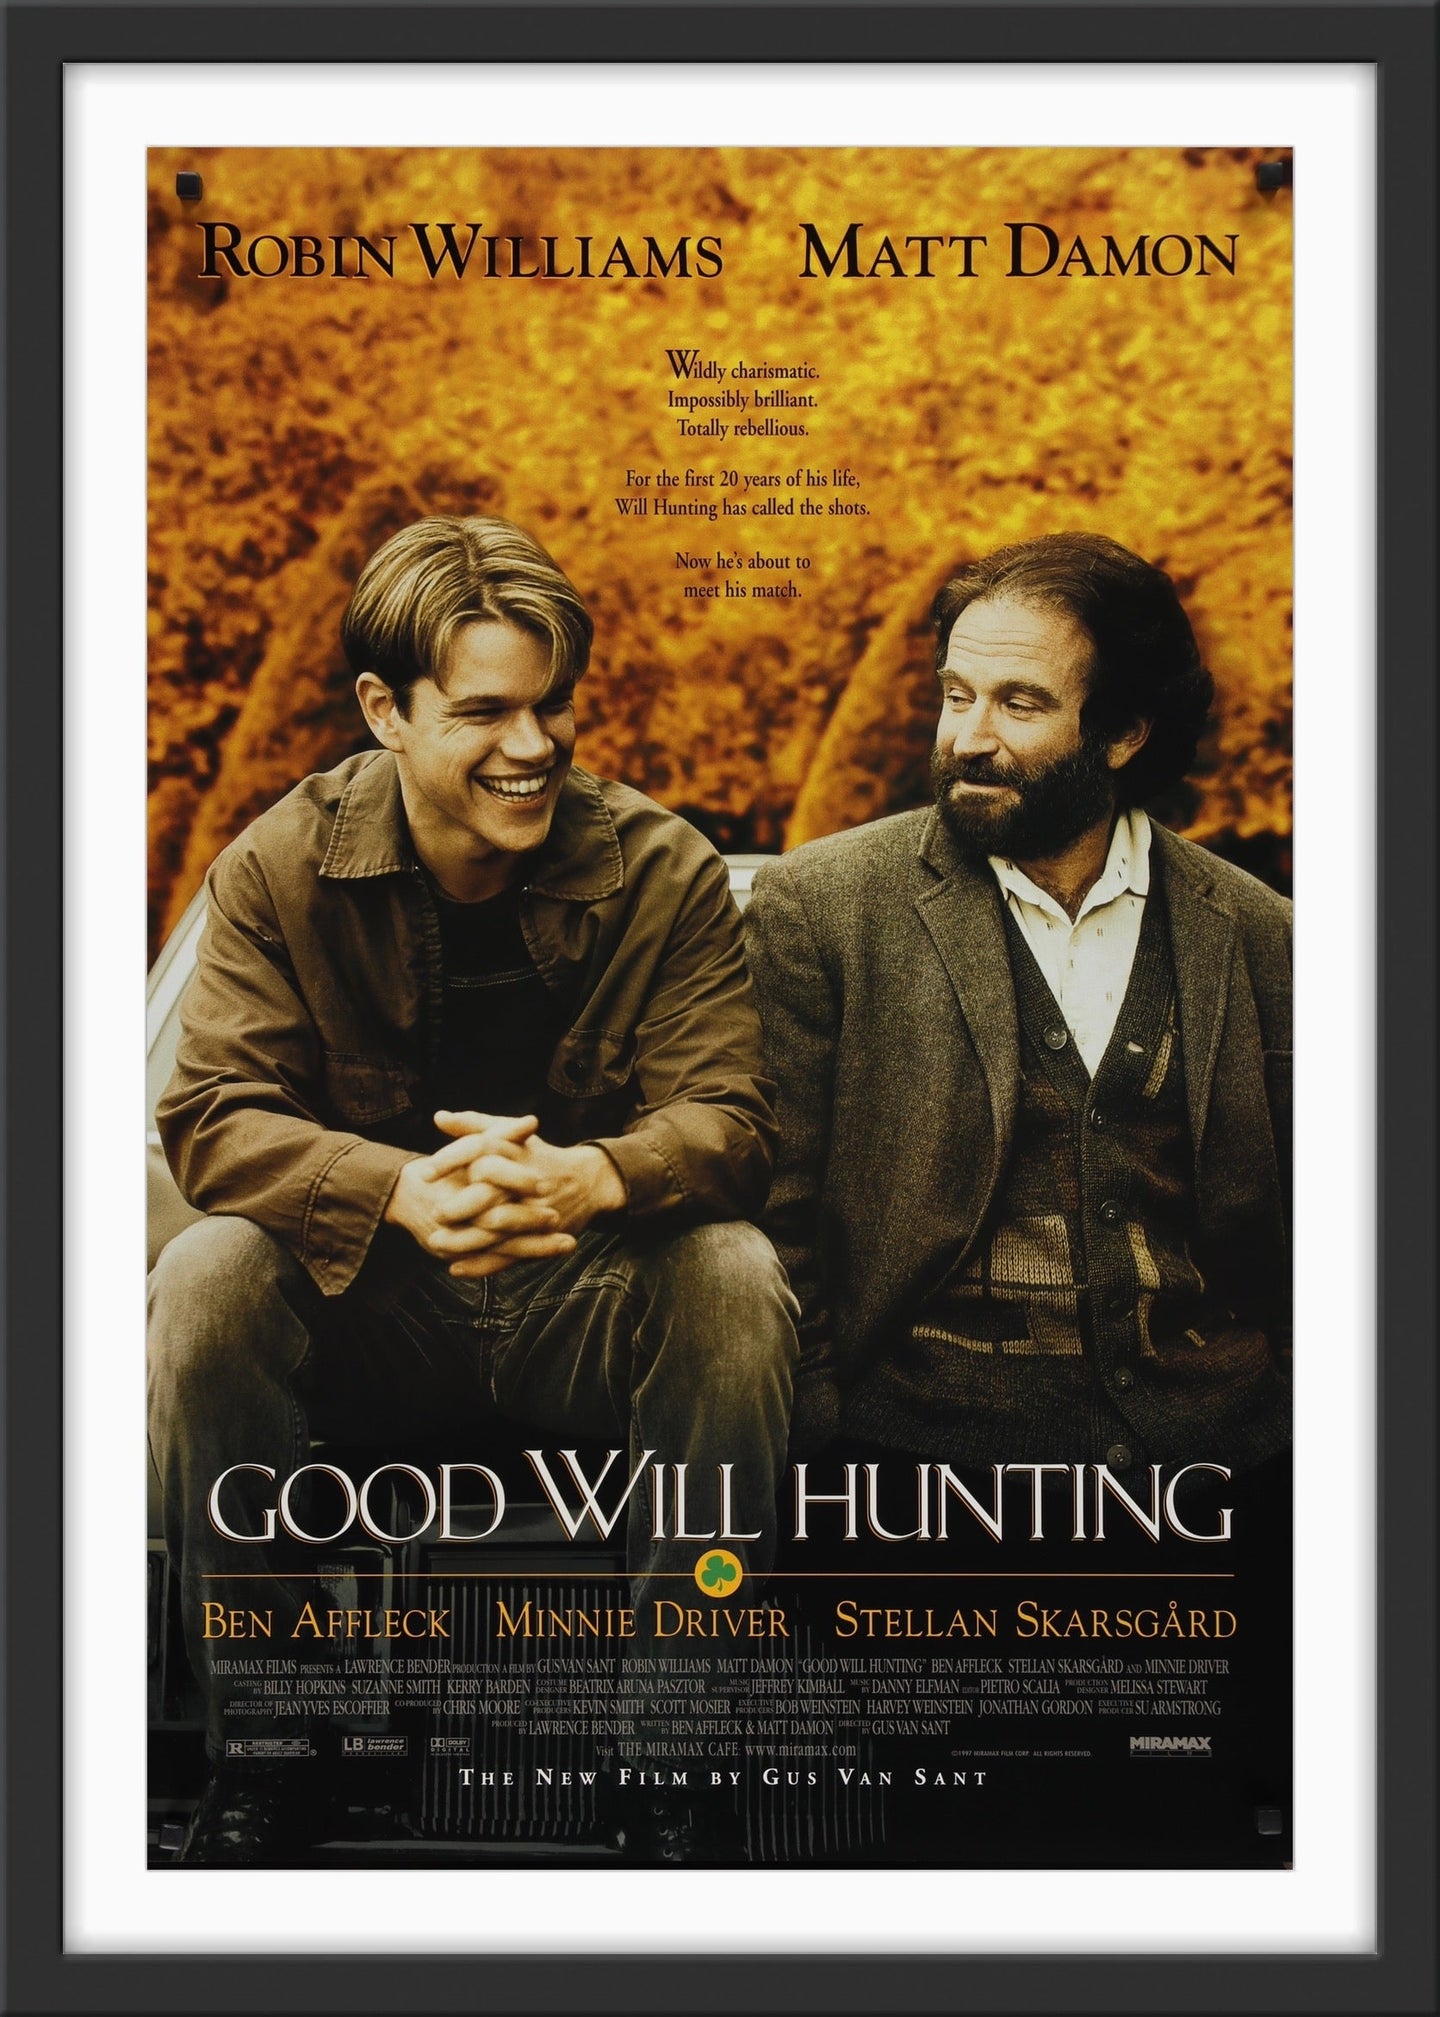 An original movie poster for the film Good Will Hunting